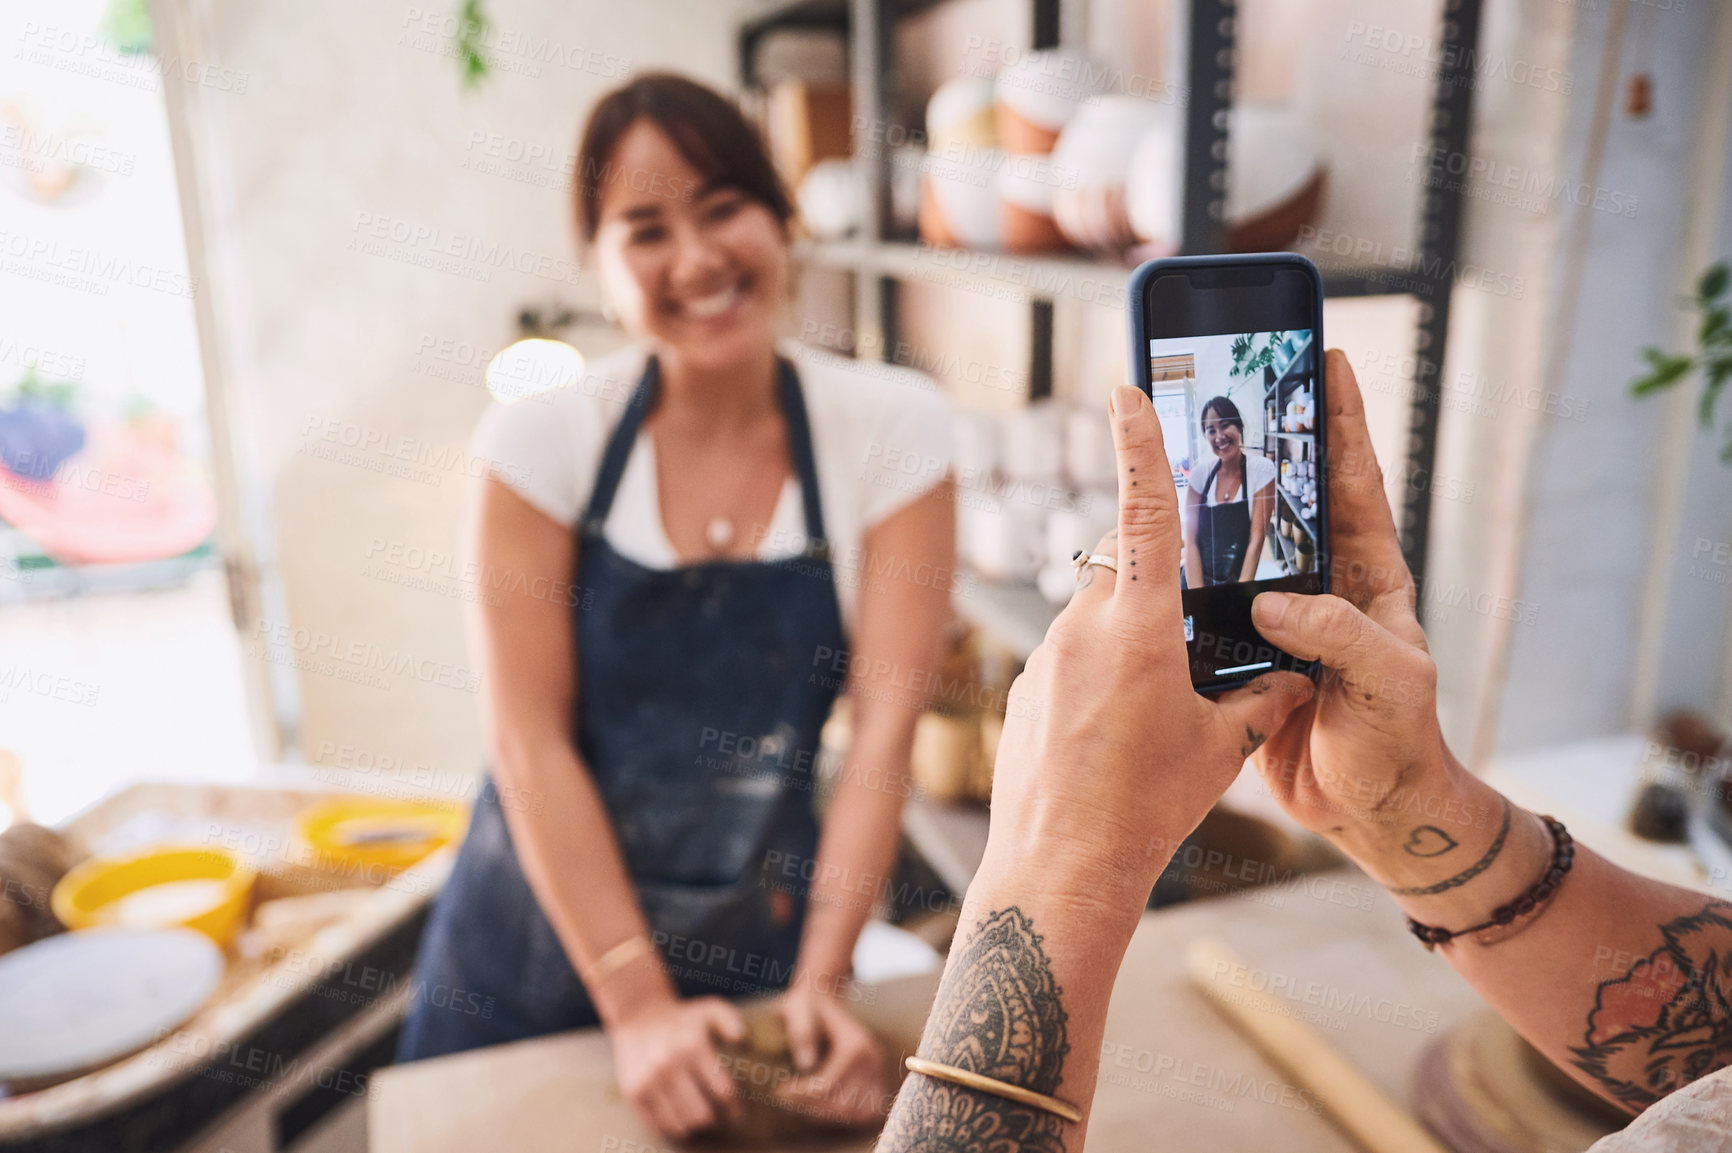 Buy stock photo Shot of a woman using a smartphone to take pictures of her friend in a pottery studio